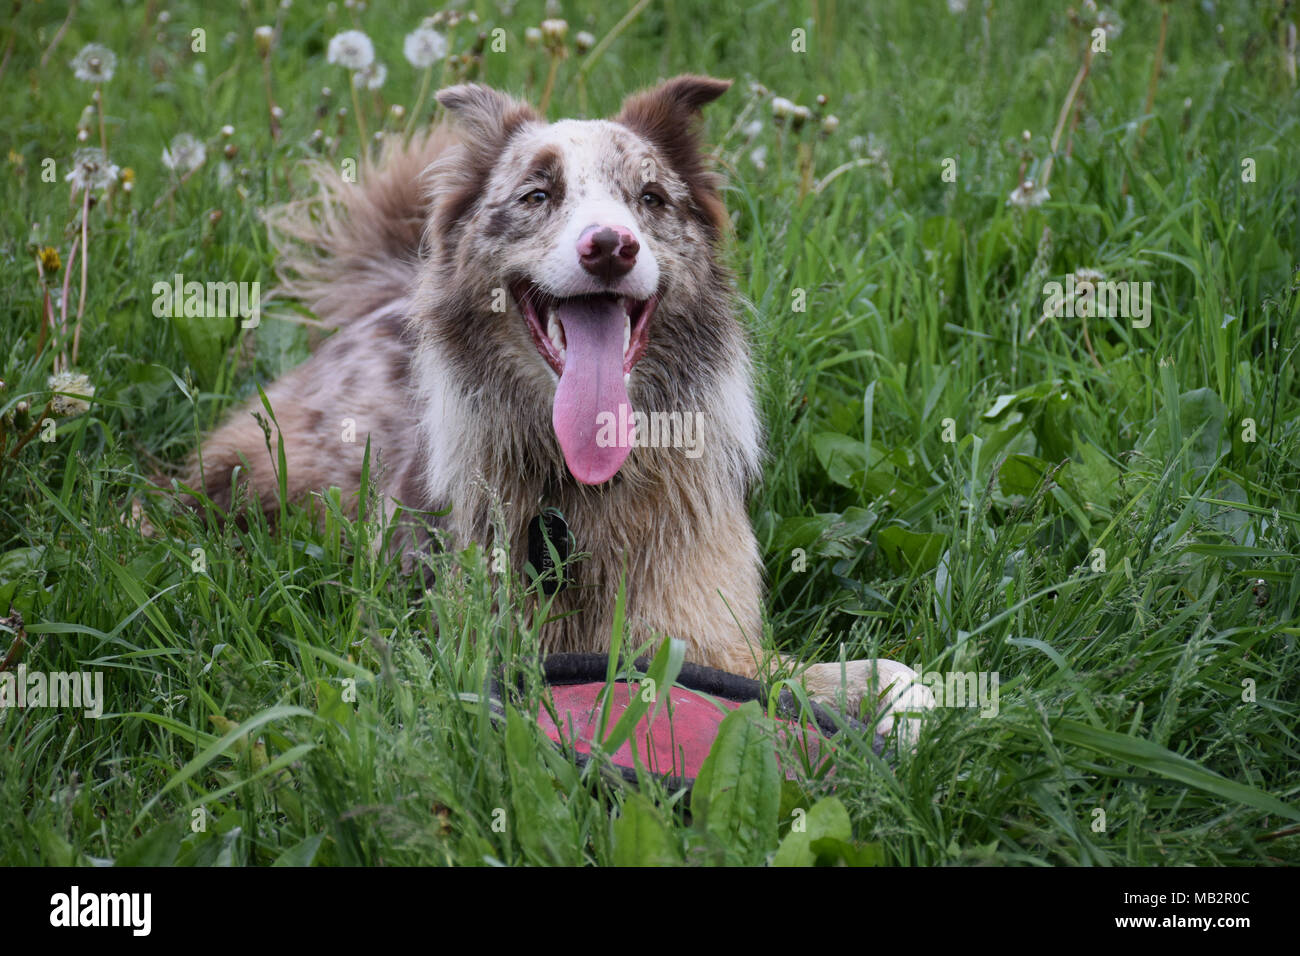 A sweet dog laying down in a field Stock Photo